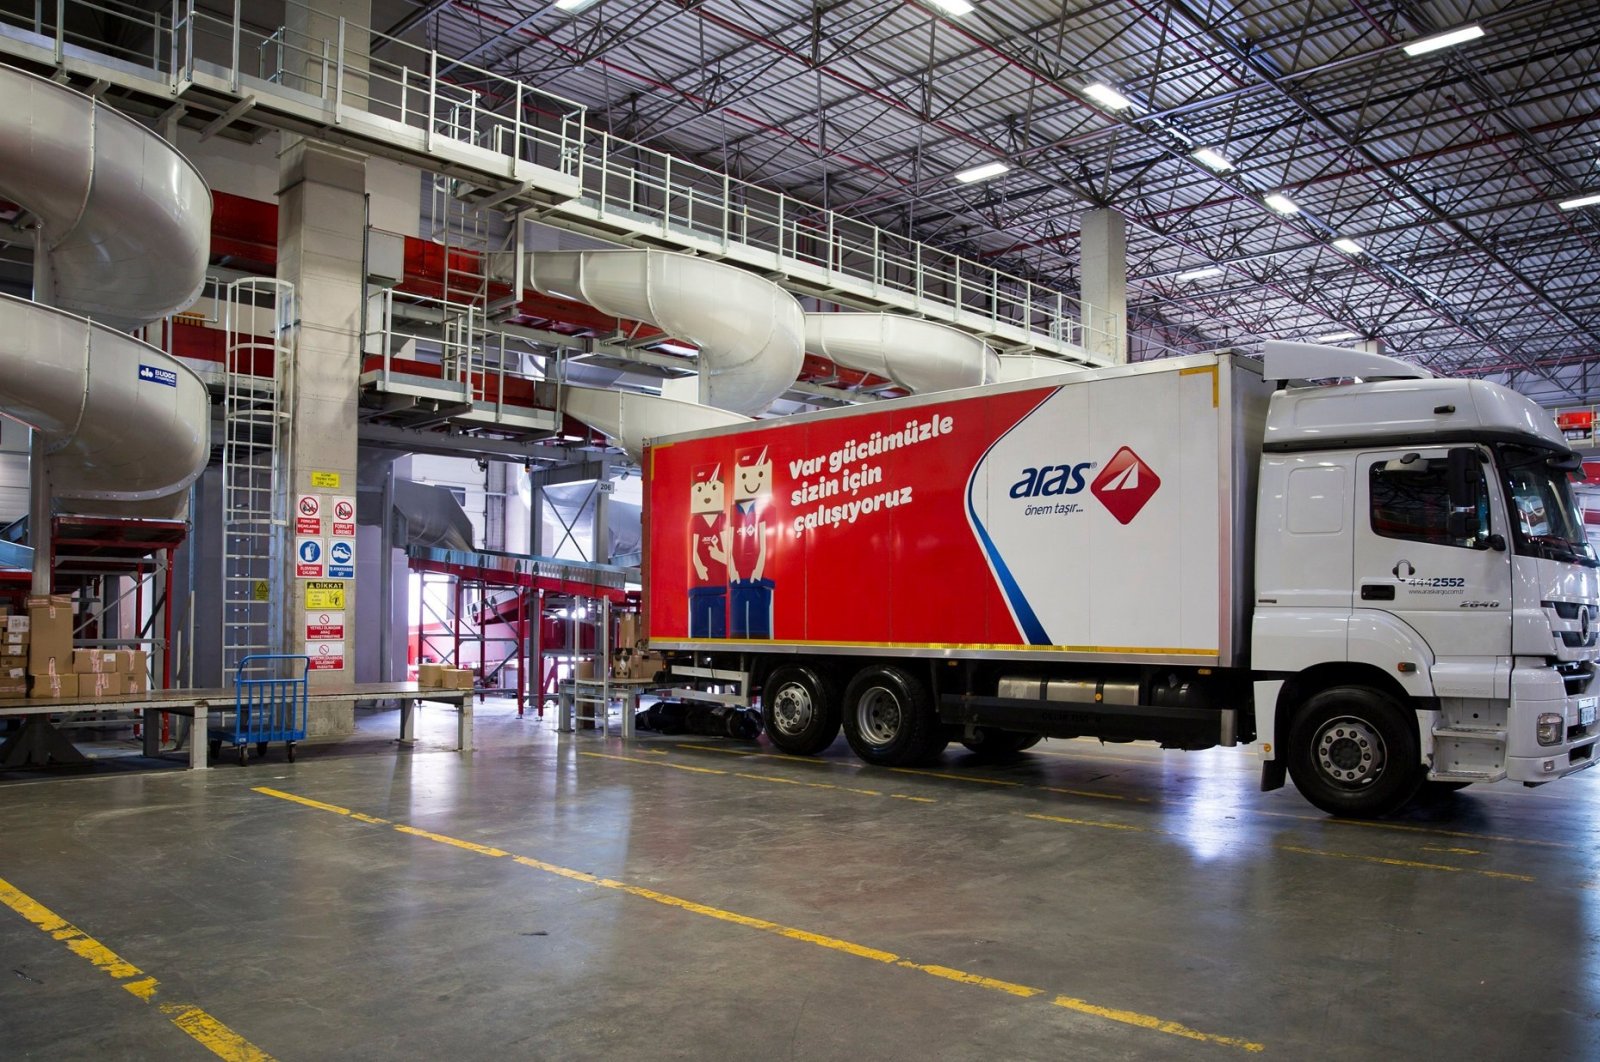 An Aras Kargo truck is seen at the company’s Ikiteli Transfer Center in Istanbul’s Başakşehir district in this undated file photo.